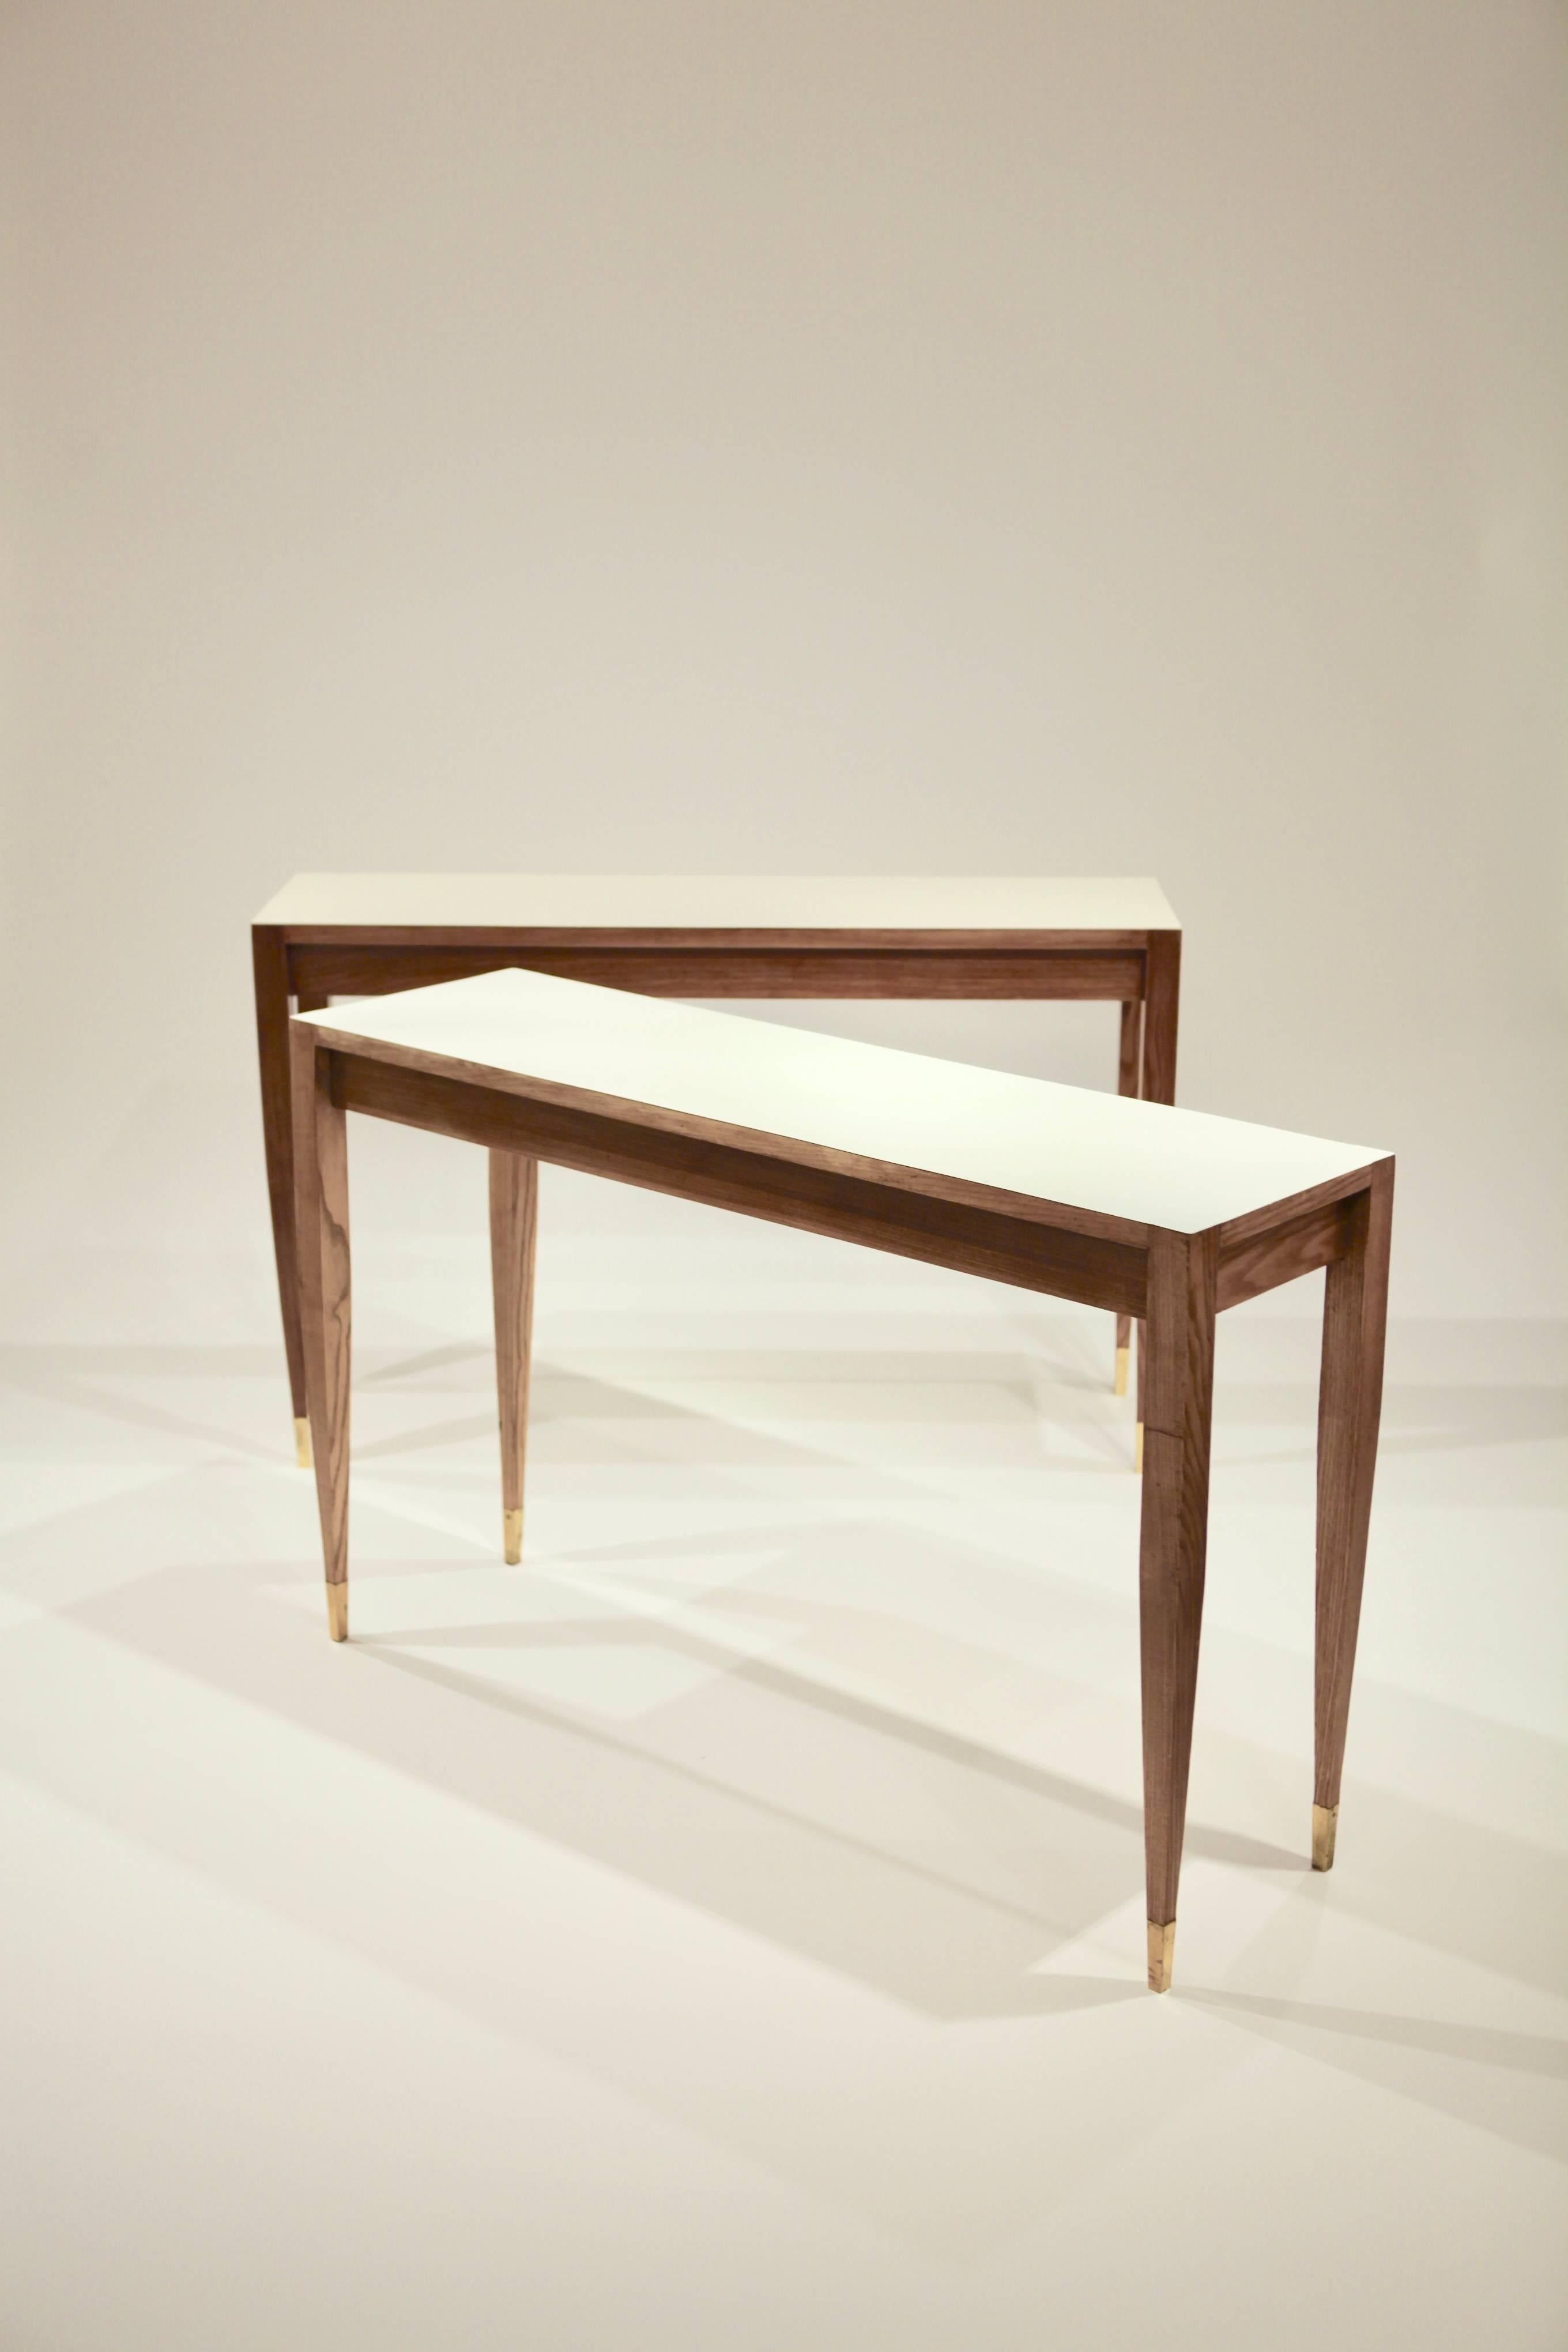 Console table by Gio Ponti,
Manufactured for the Parco dei Principe Hotel Sorrento, circa 1961
Ash formica brass.